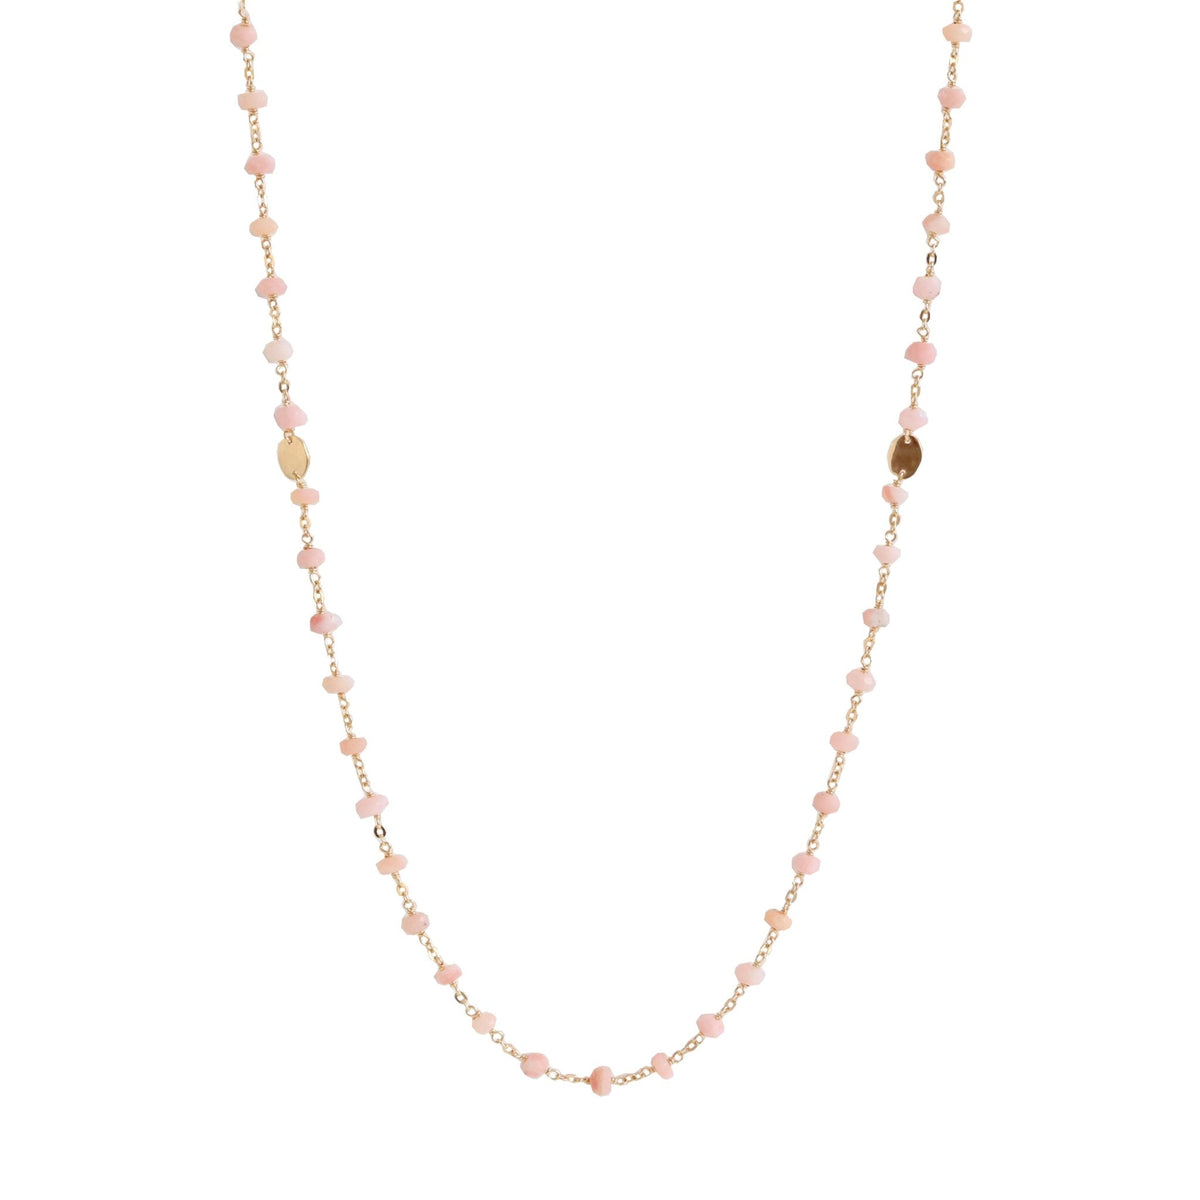 ICONIC LONG BEADED NECKLACE - PINK OPAL &amp; GOLD 34&quot; - SO PRETTY CARA COTTER